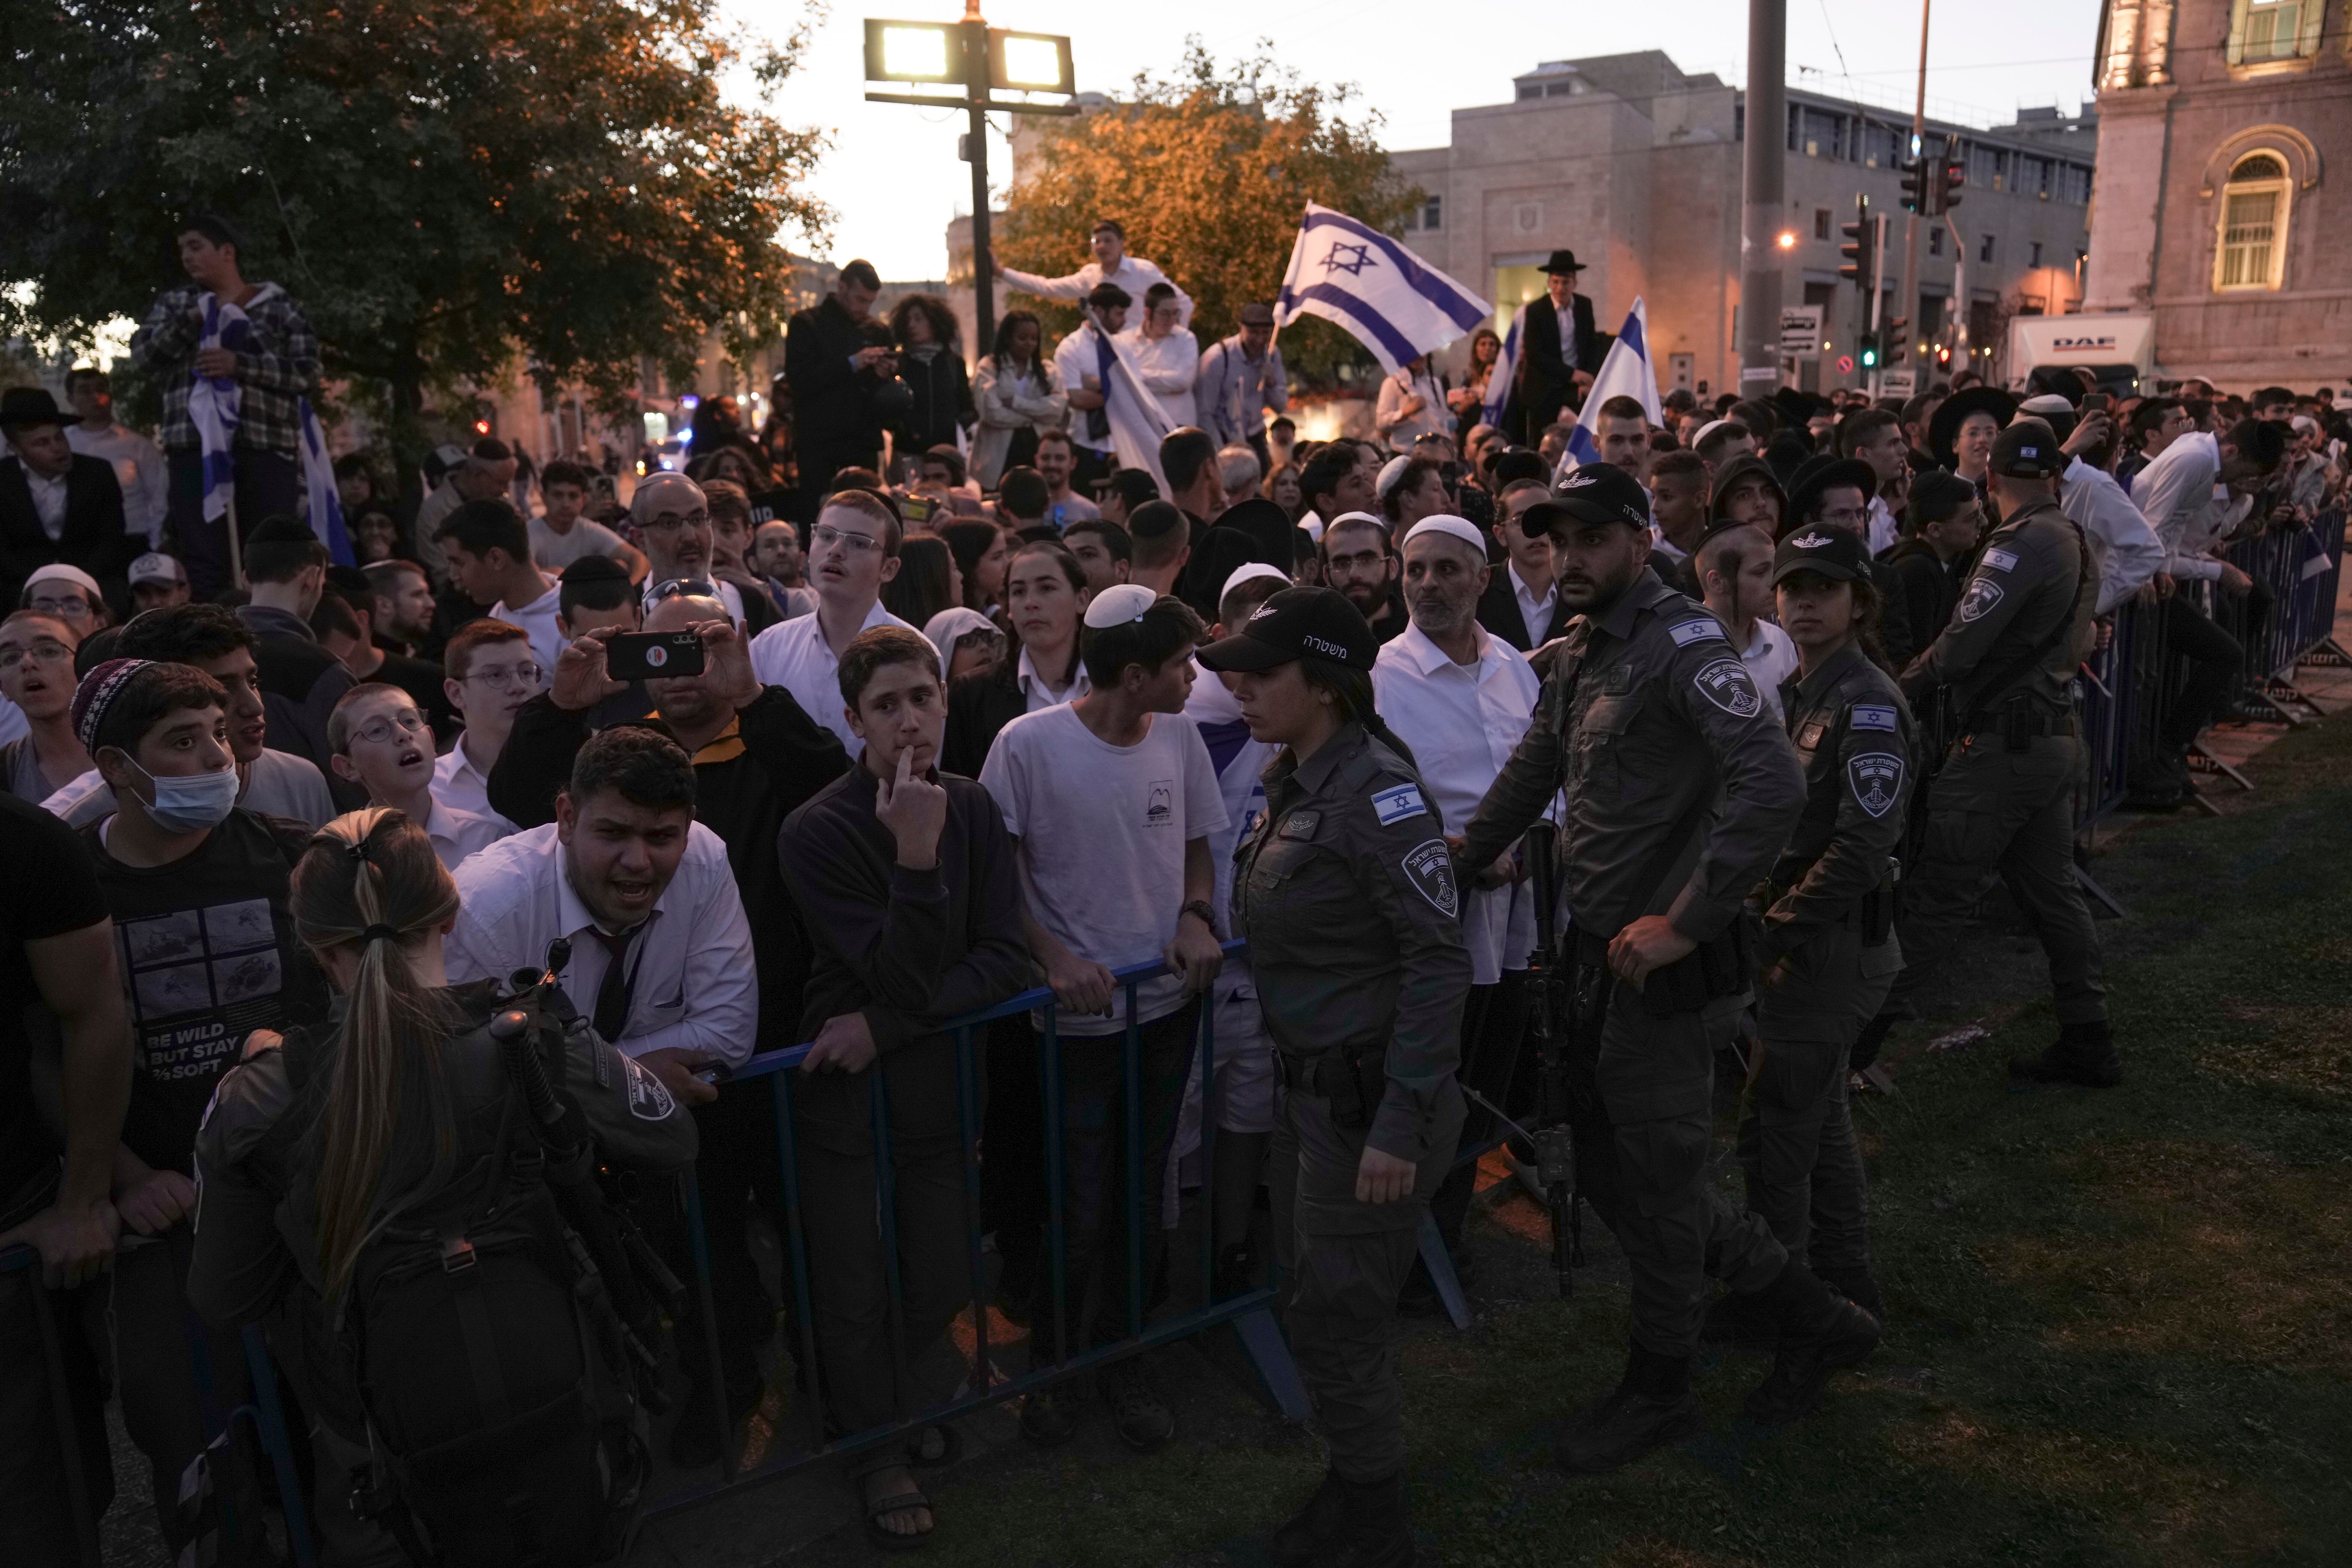 Israeli security forces stop a far-right demonstration from marching towards Jerusalem’s Old City on 20 April 2022